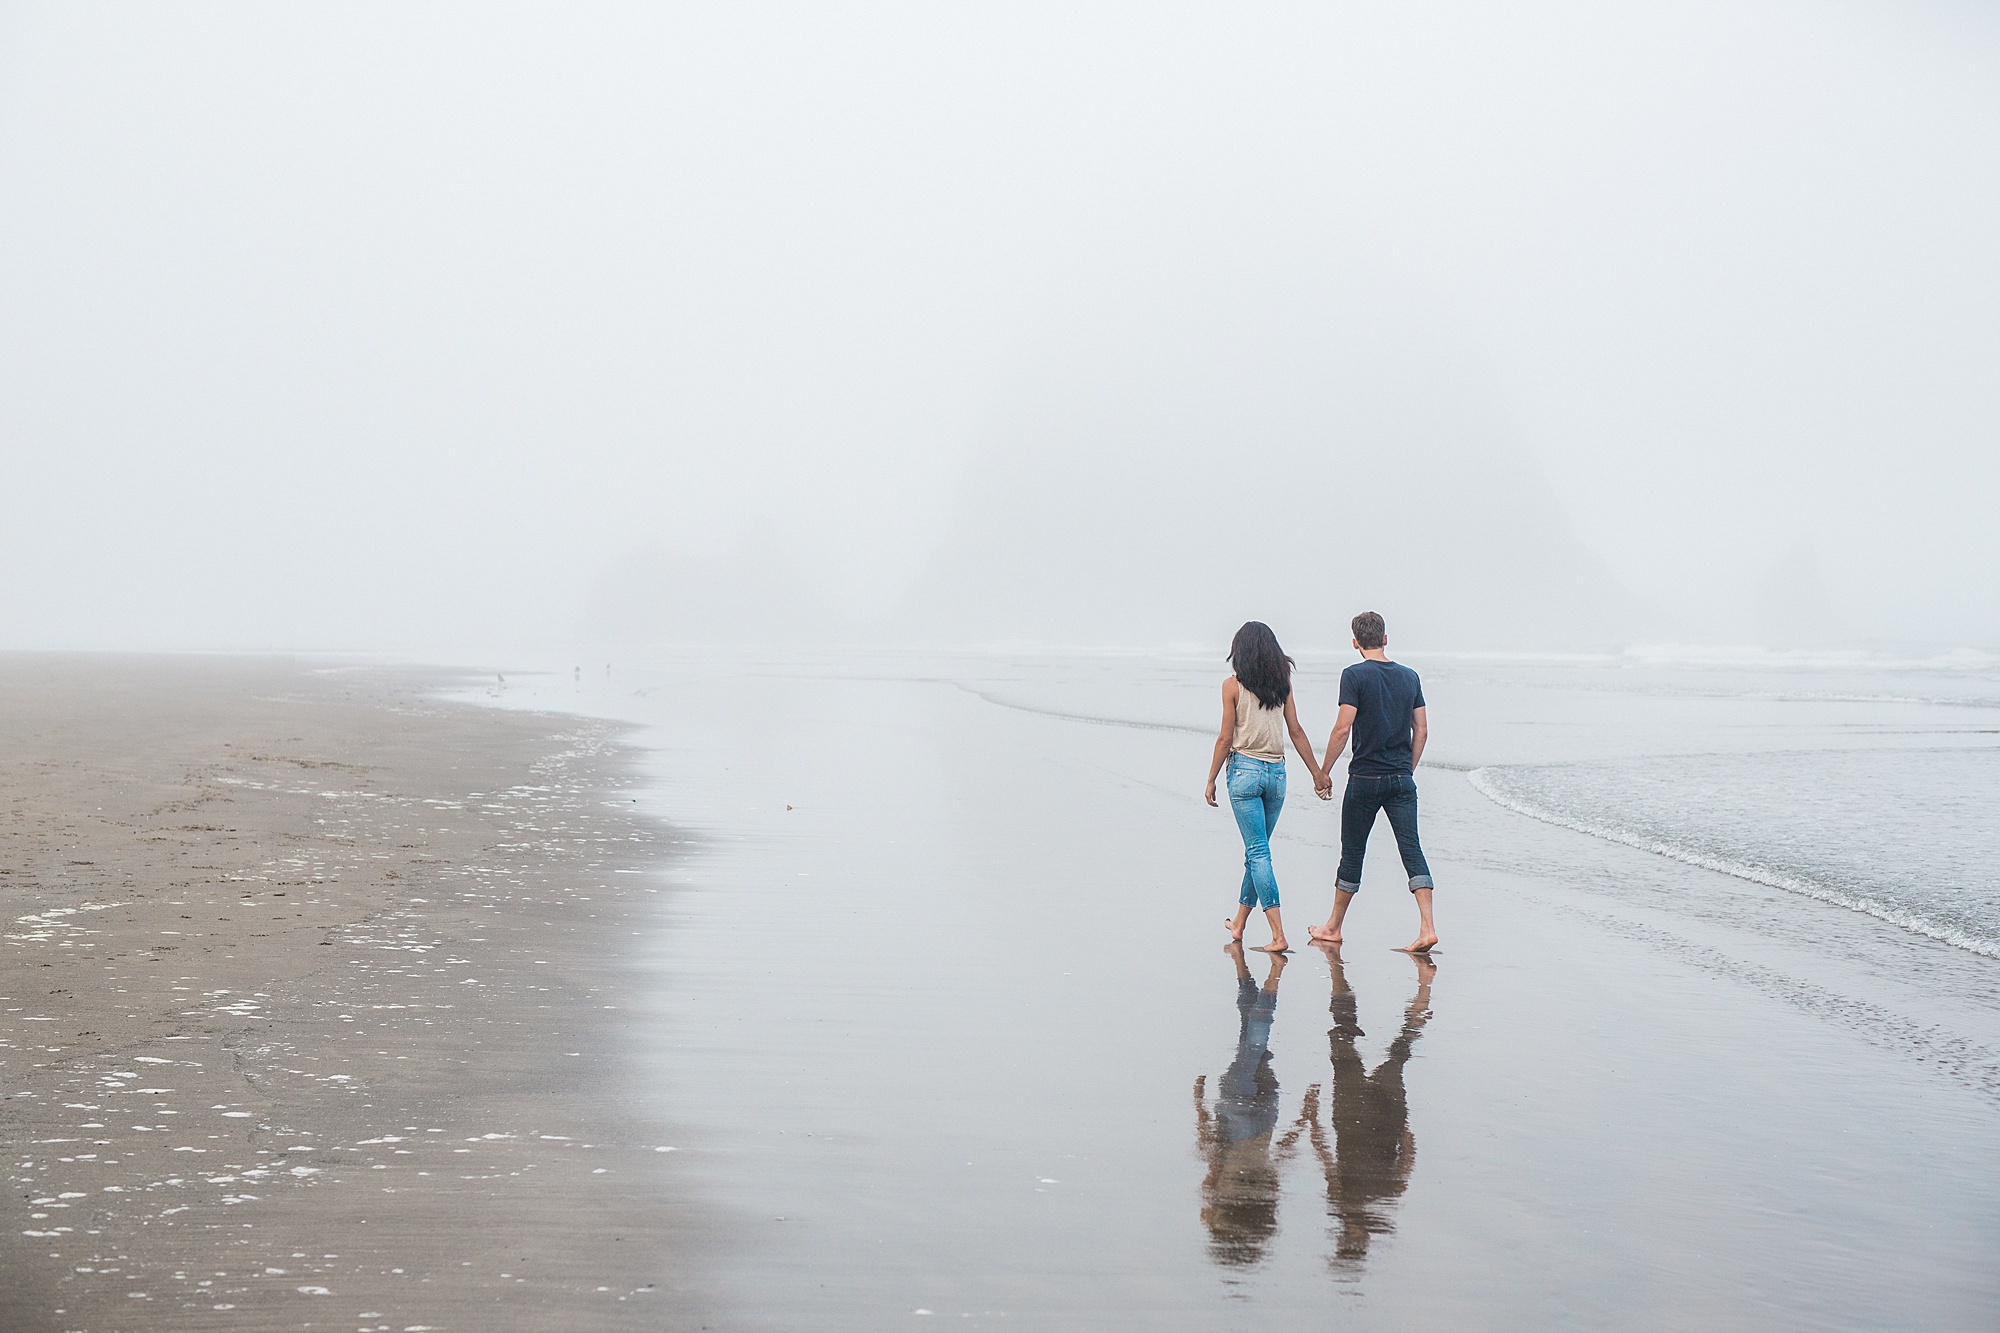 cannon beach engagement session oregon coast new mexico colorado hazel and lace photography